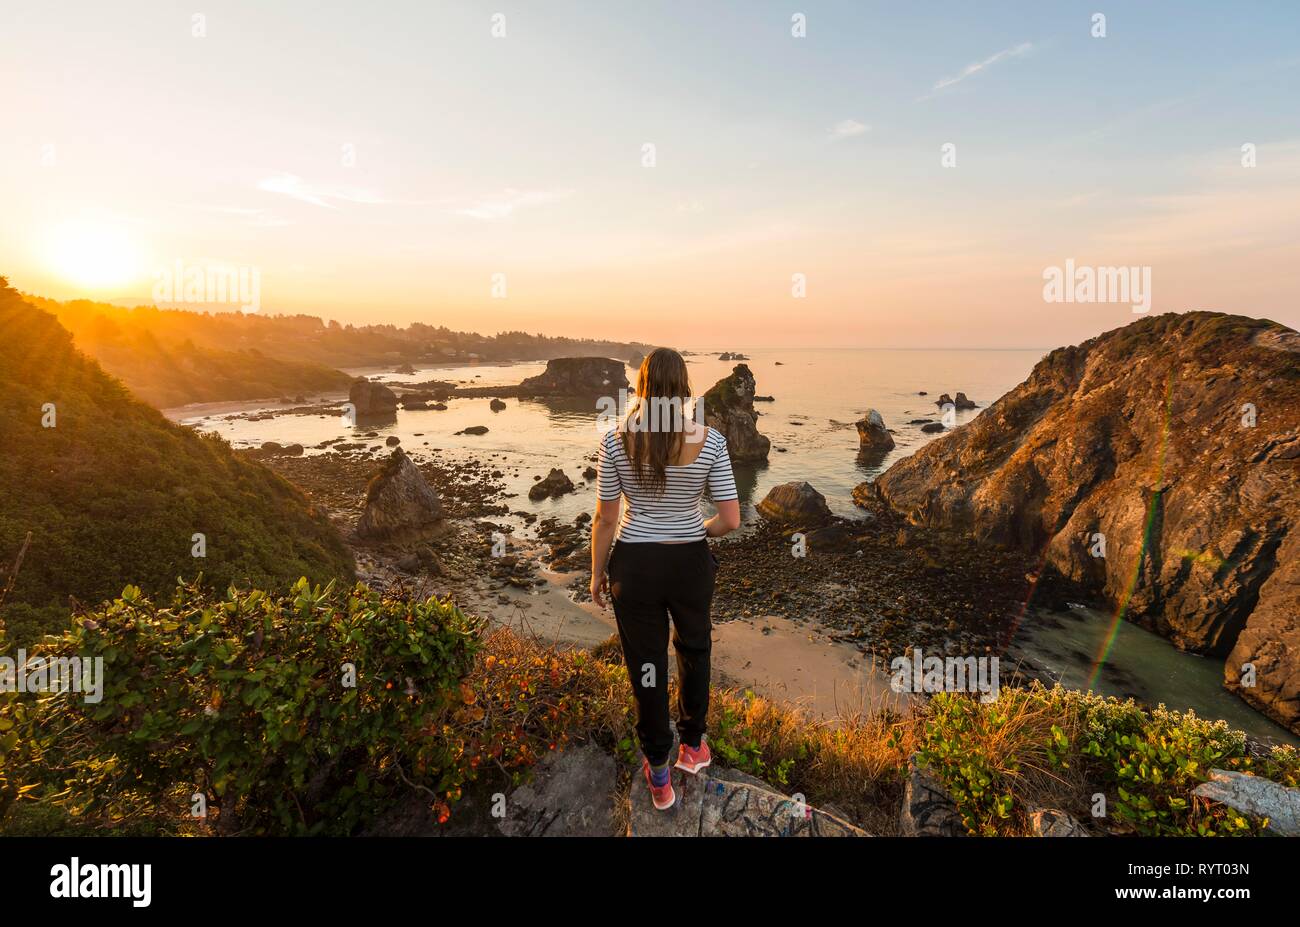 Young woman looking into the sunrise, rugged coastal landscape with many rocky islands, Arch Rock, Harris Beach State Park Stock Photo